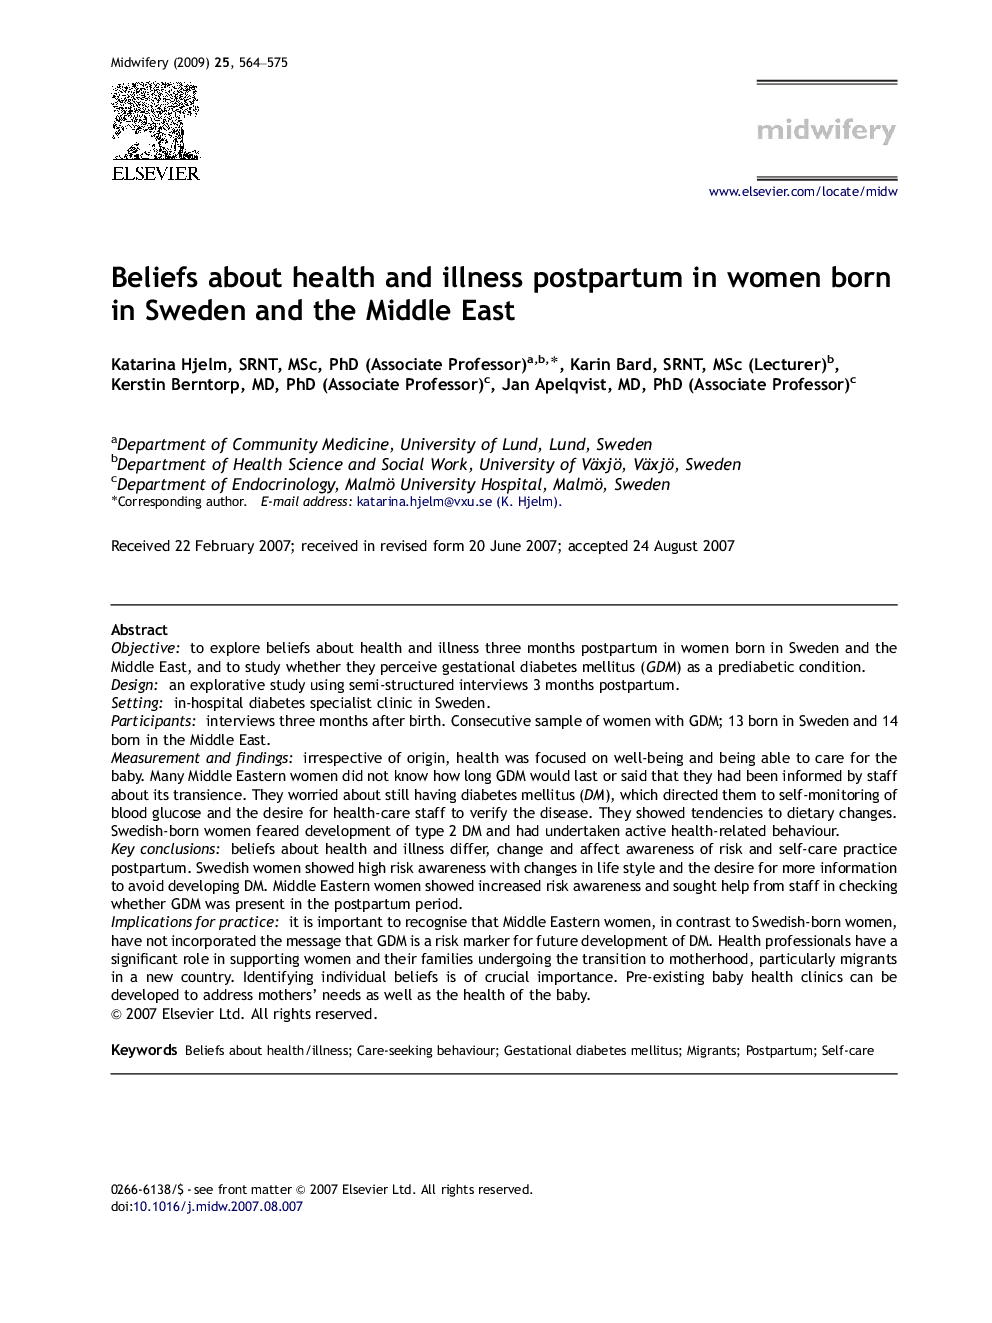 Beliefs about health and illness postpartum in women born in Sweden and the Middle East